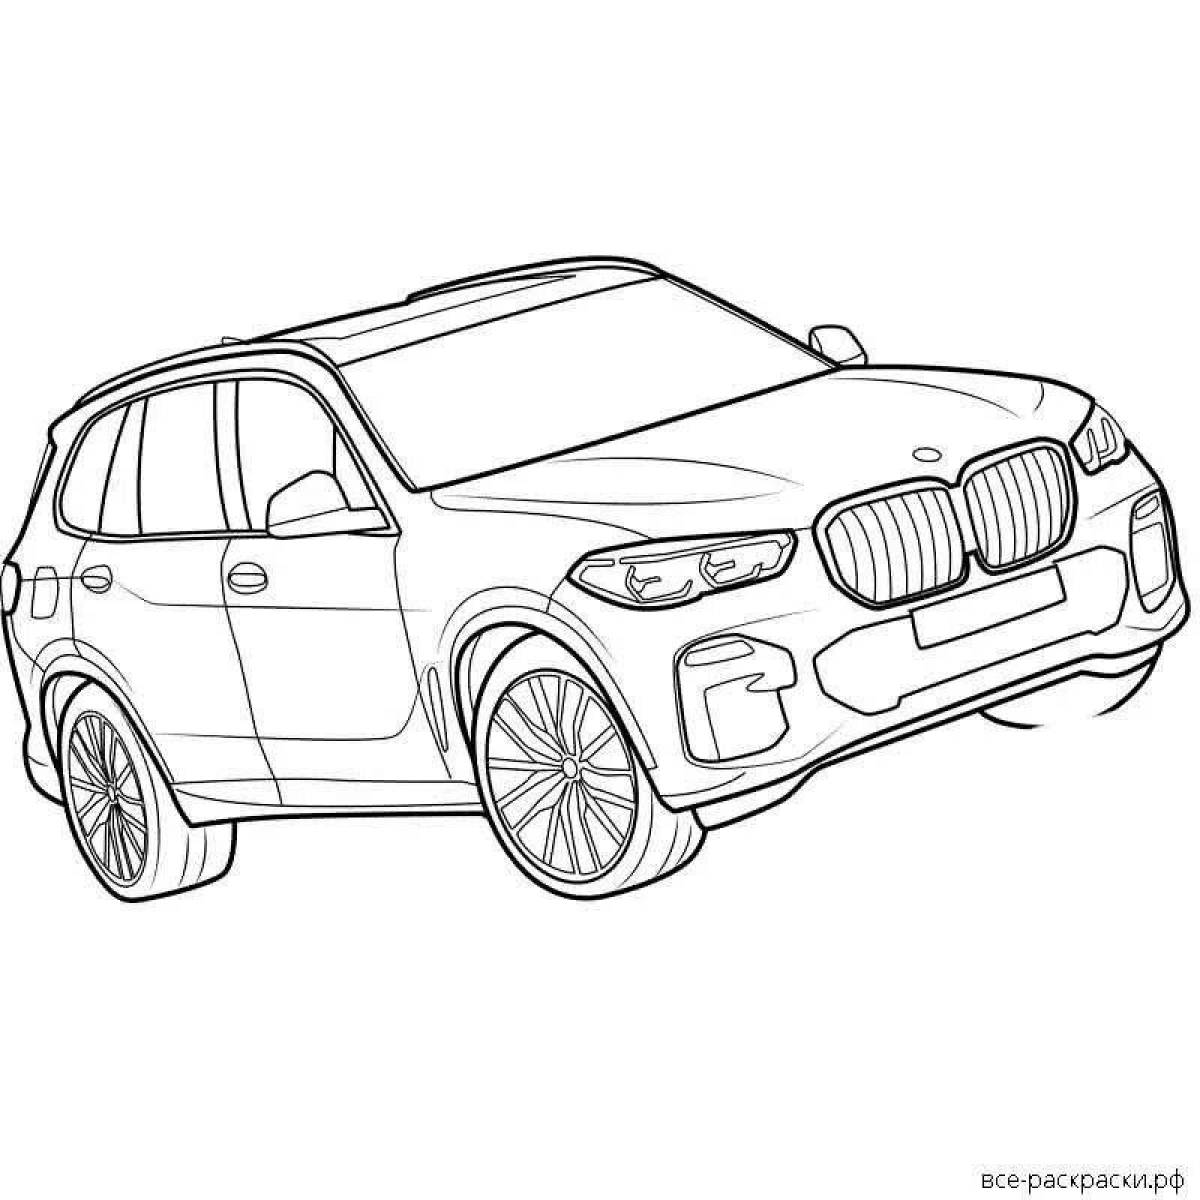 Luxury bmw x6 coloring page